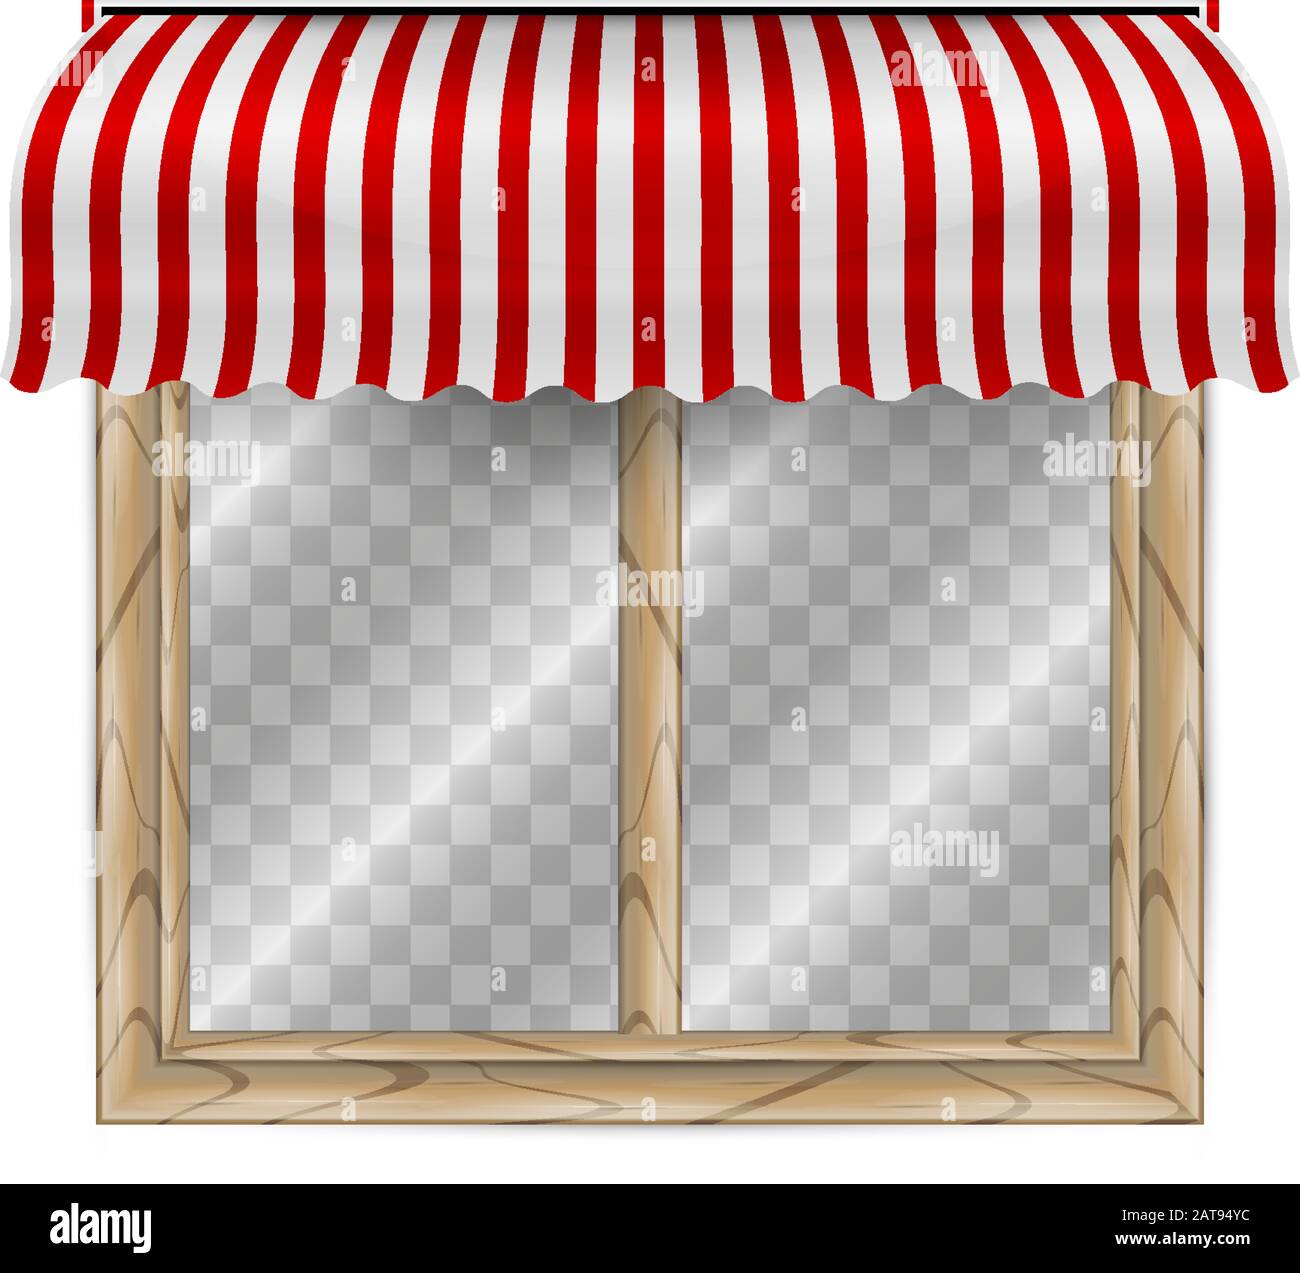 Double window frame with striped awning canopy. Vector illustration. Double wooden window with transparent background behind glass. Red and white stri Stock Vector